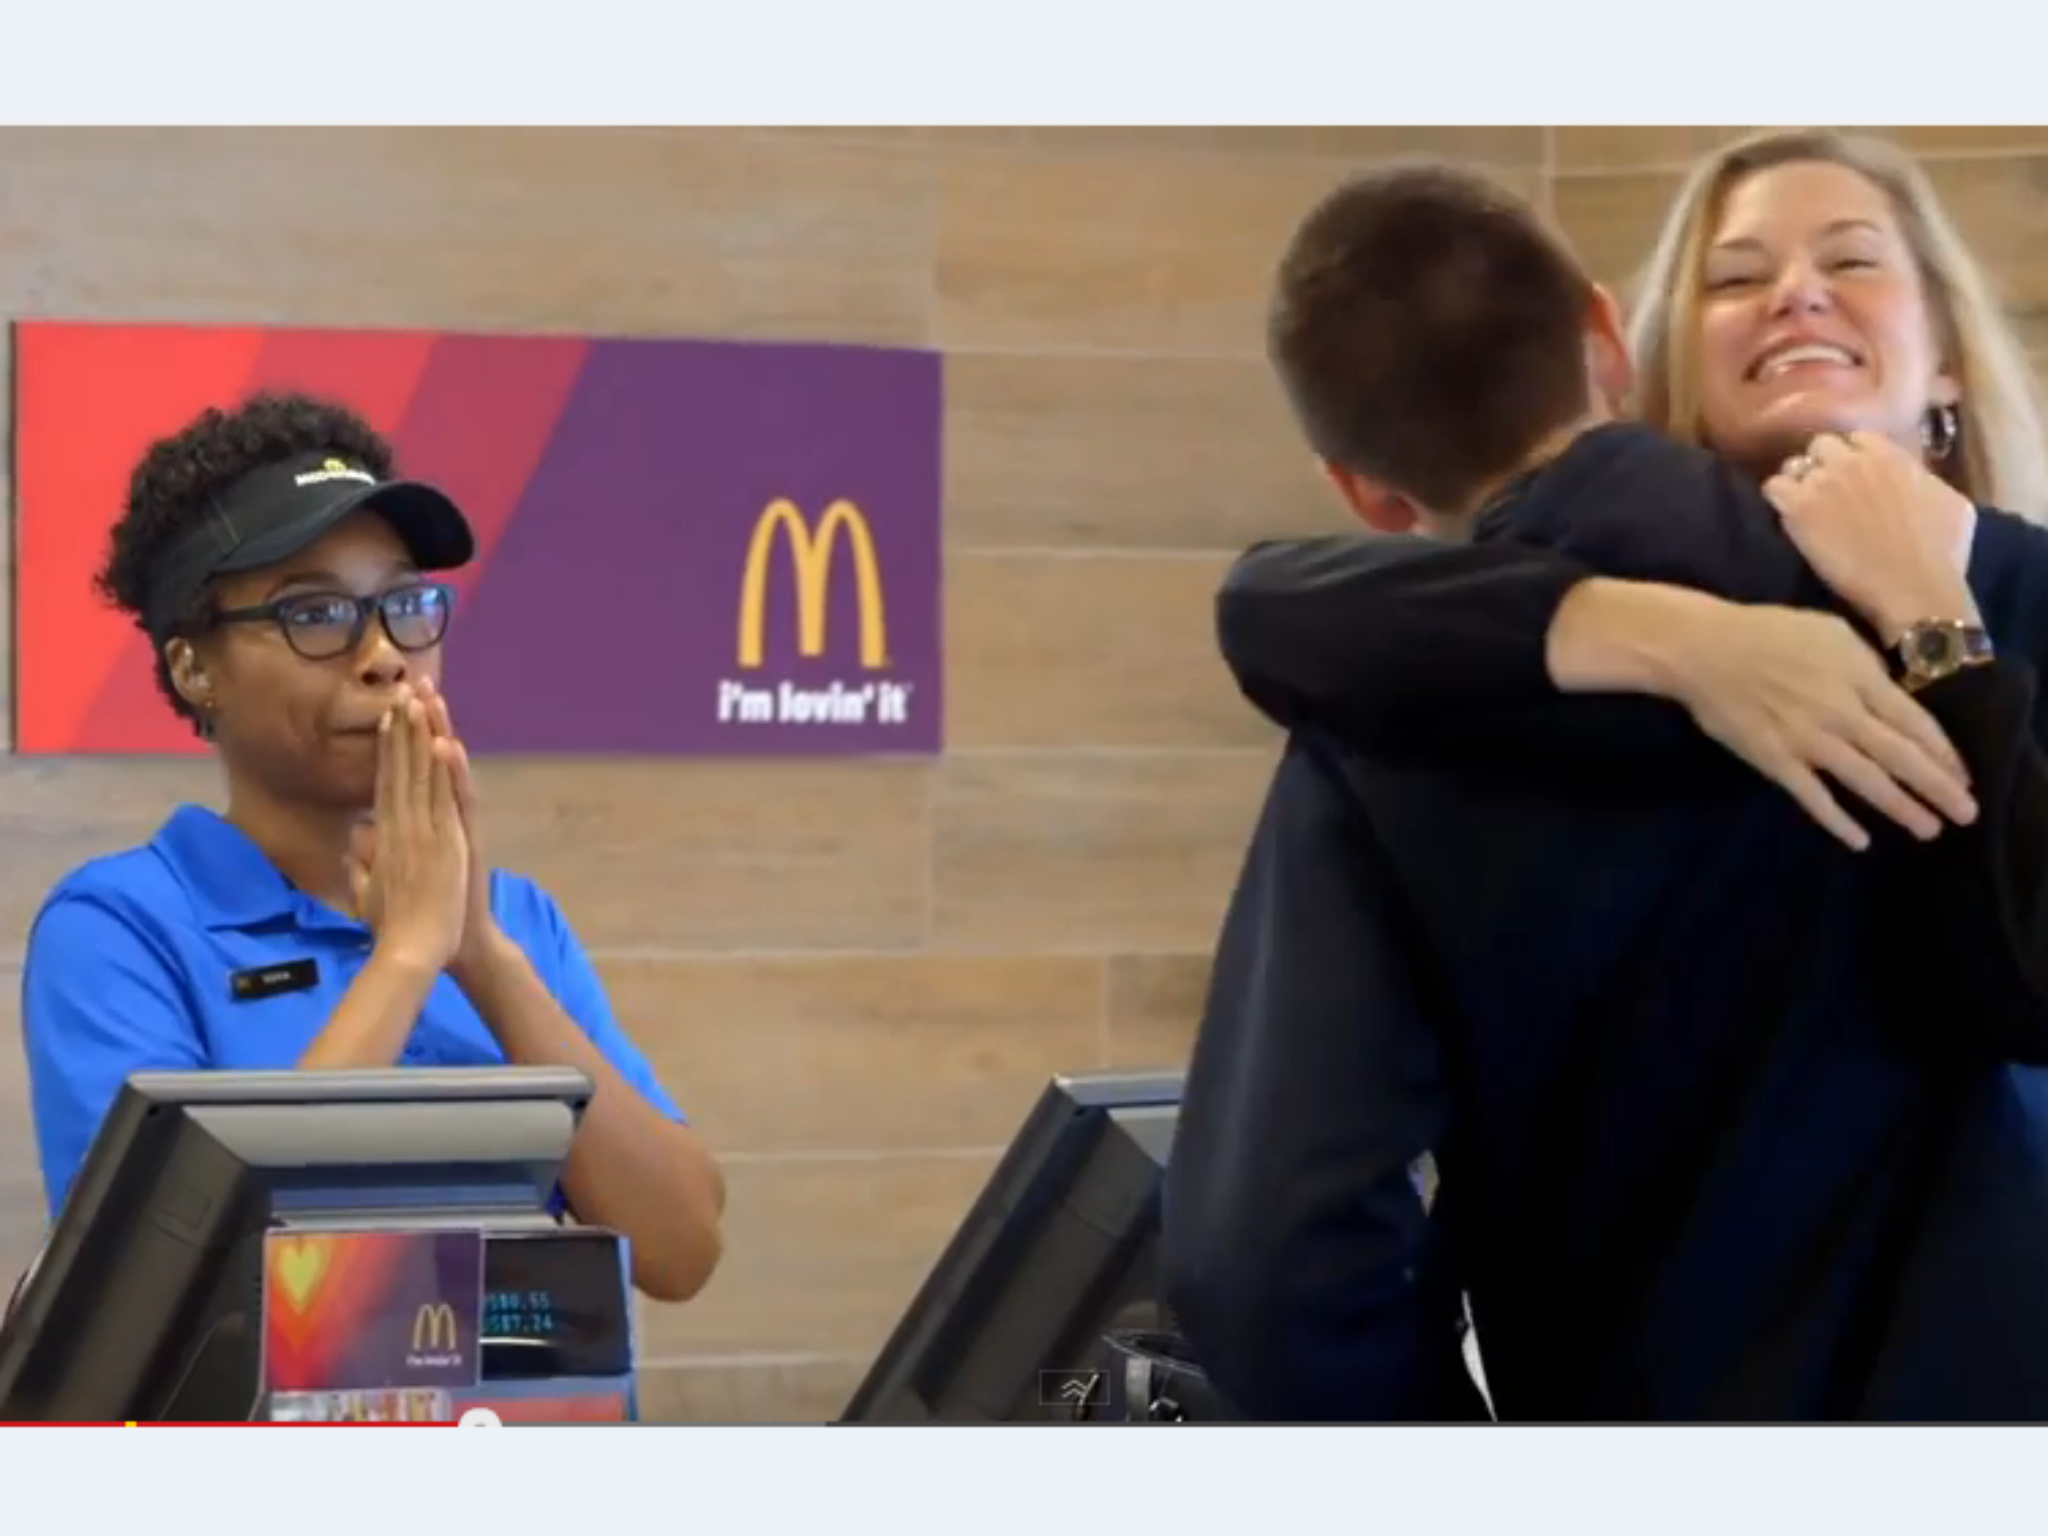 The ad which will run in the Super Bowl shows happy McDonald's customers paying for their meals in love